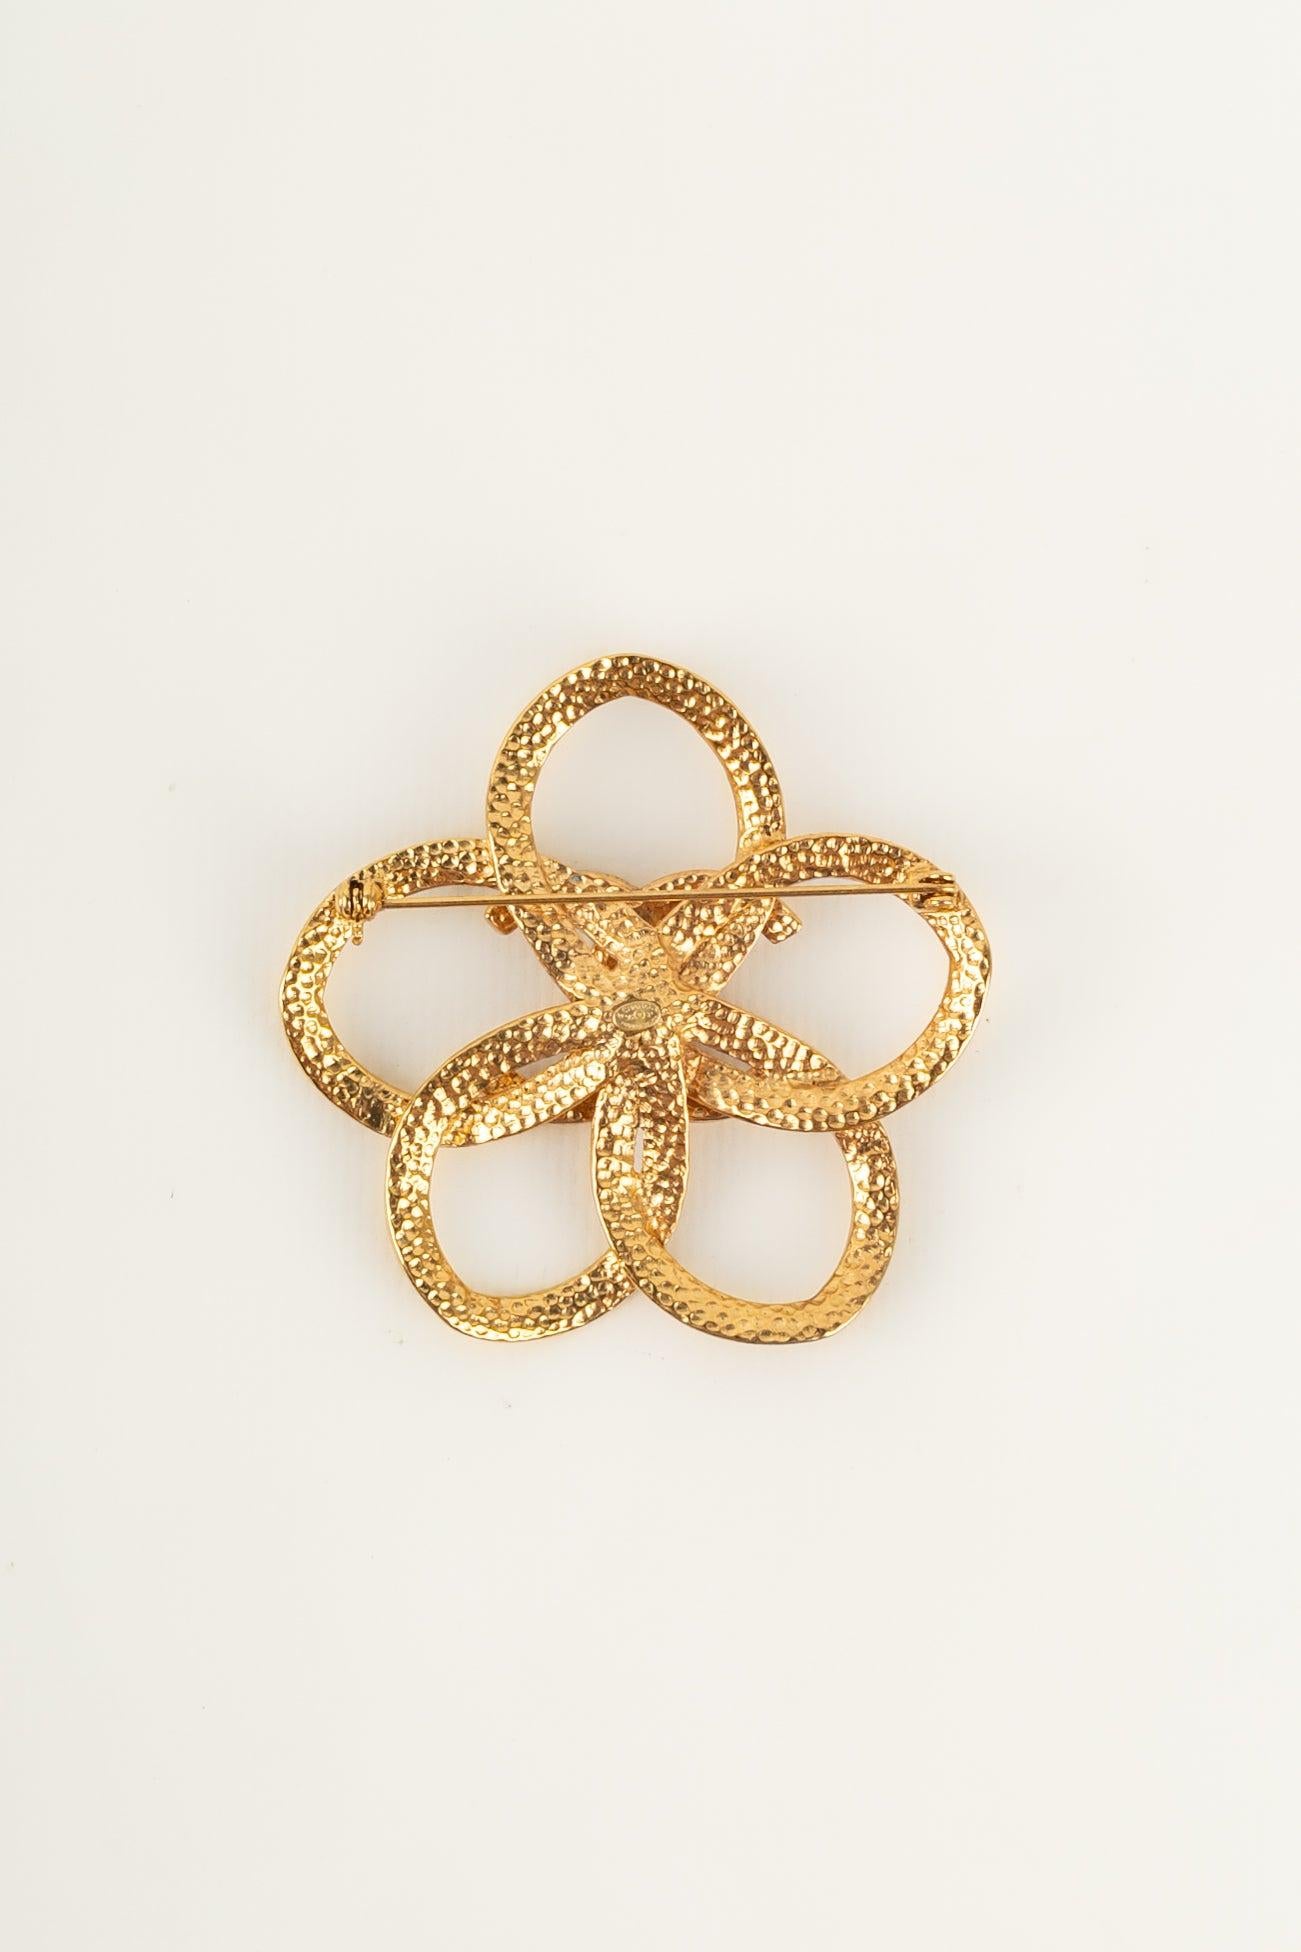 Chanel (Made in France) Brooch in gilt metal. Spring/Summer 1996 Collection.

Additional Information:
Condition: Very good condition
Dimensions: Height: 7 cm
Period: 20th Century

Seller Reference: CB7